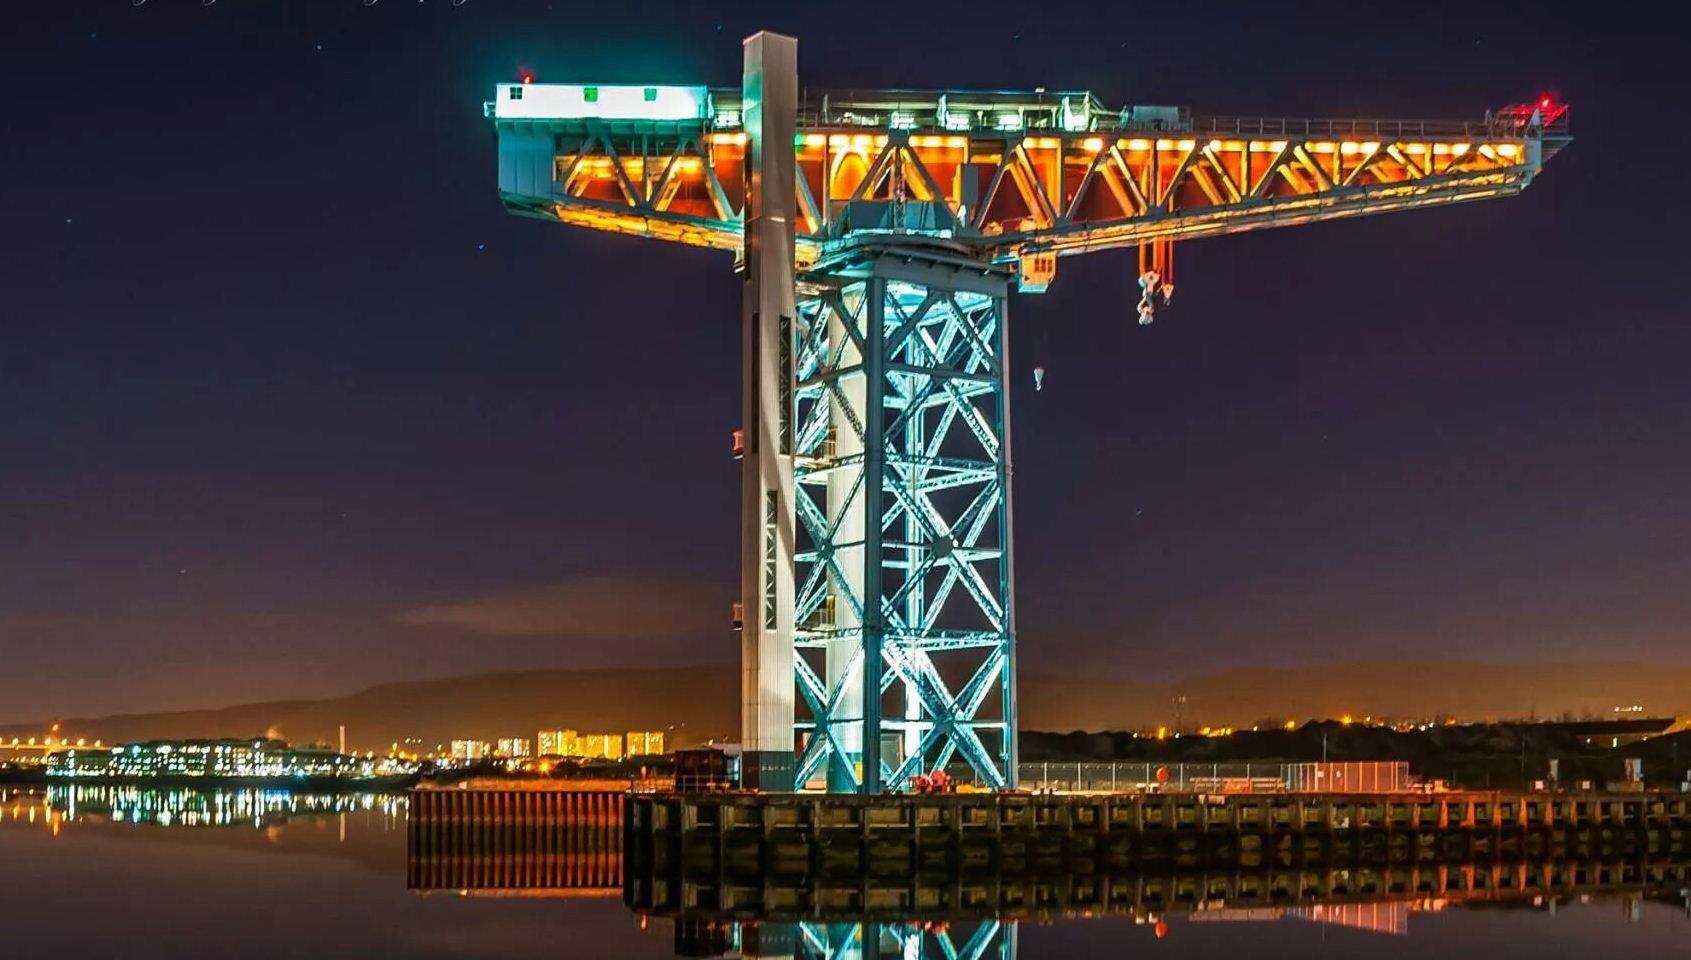 Titan crane: one of the landmarks lit up for World MS Day